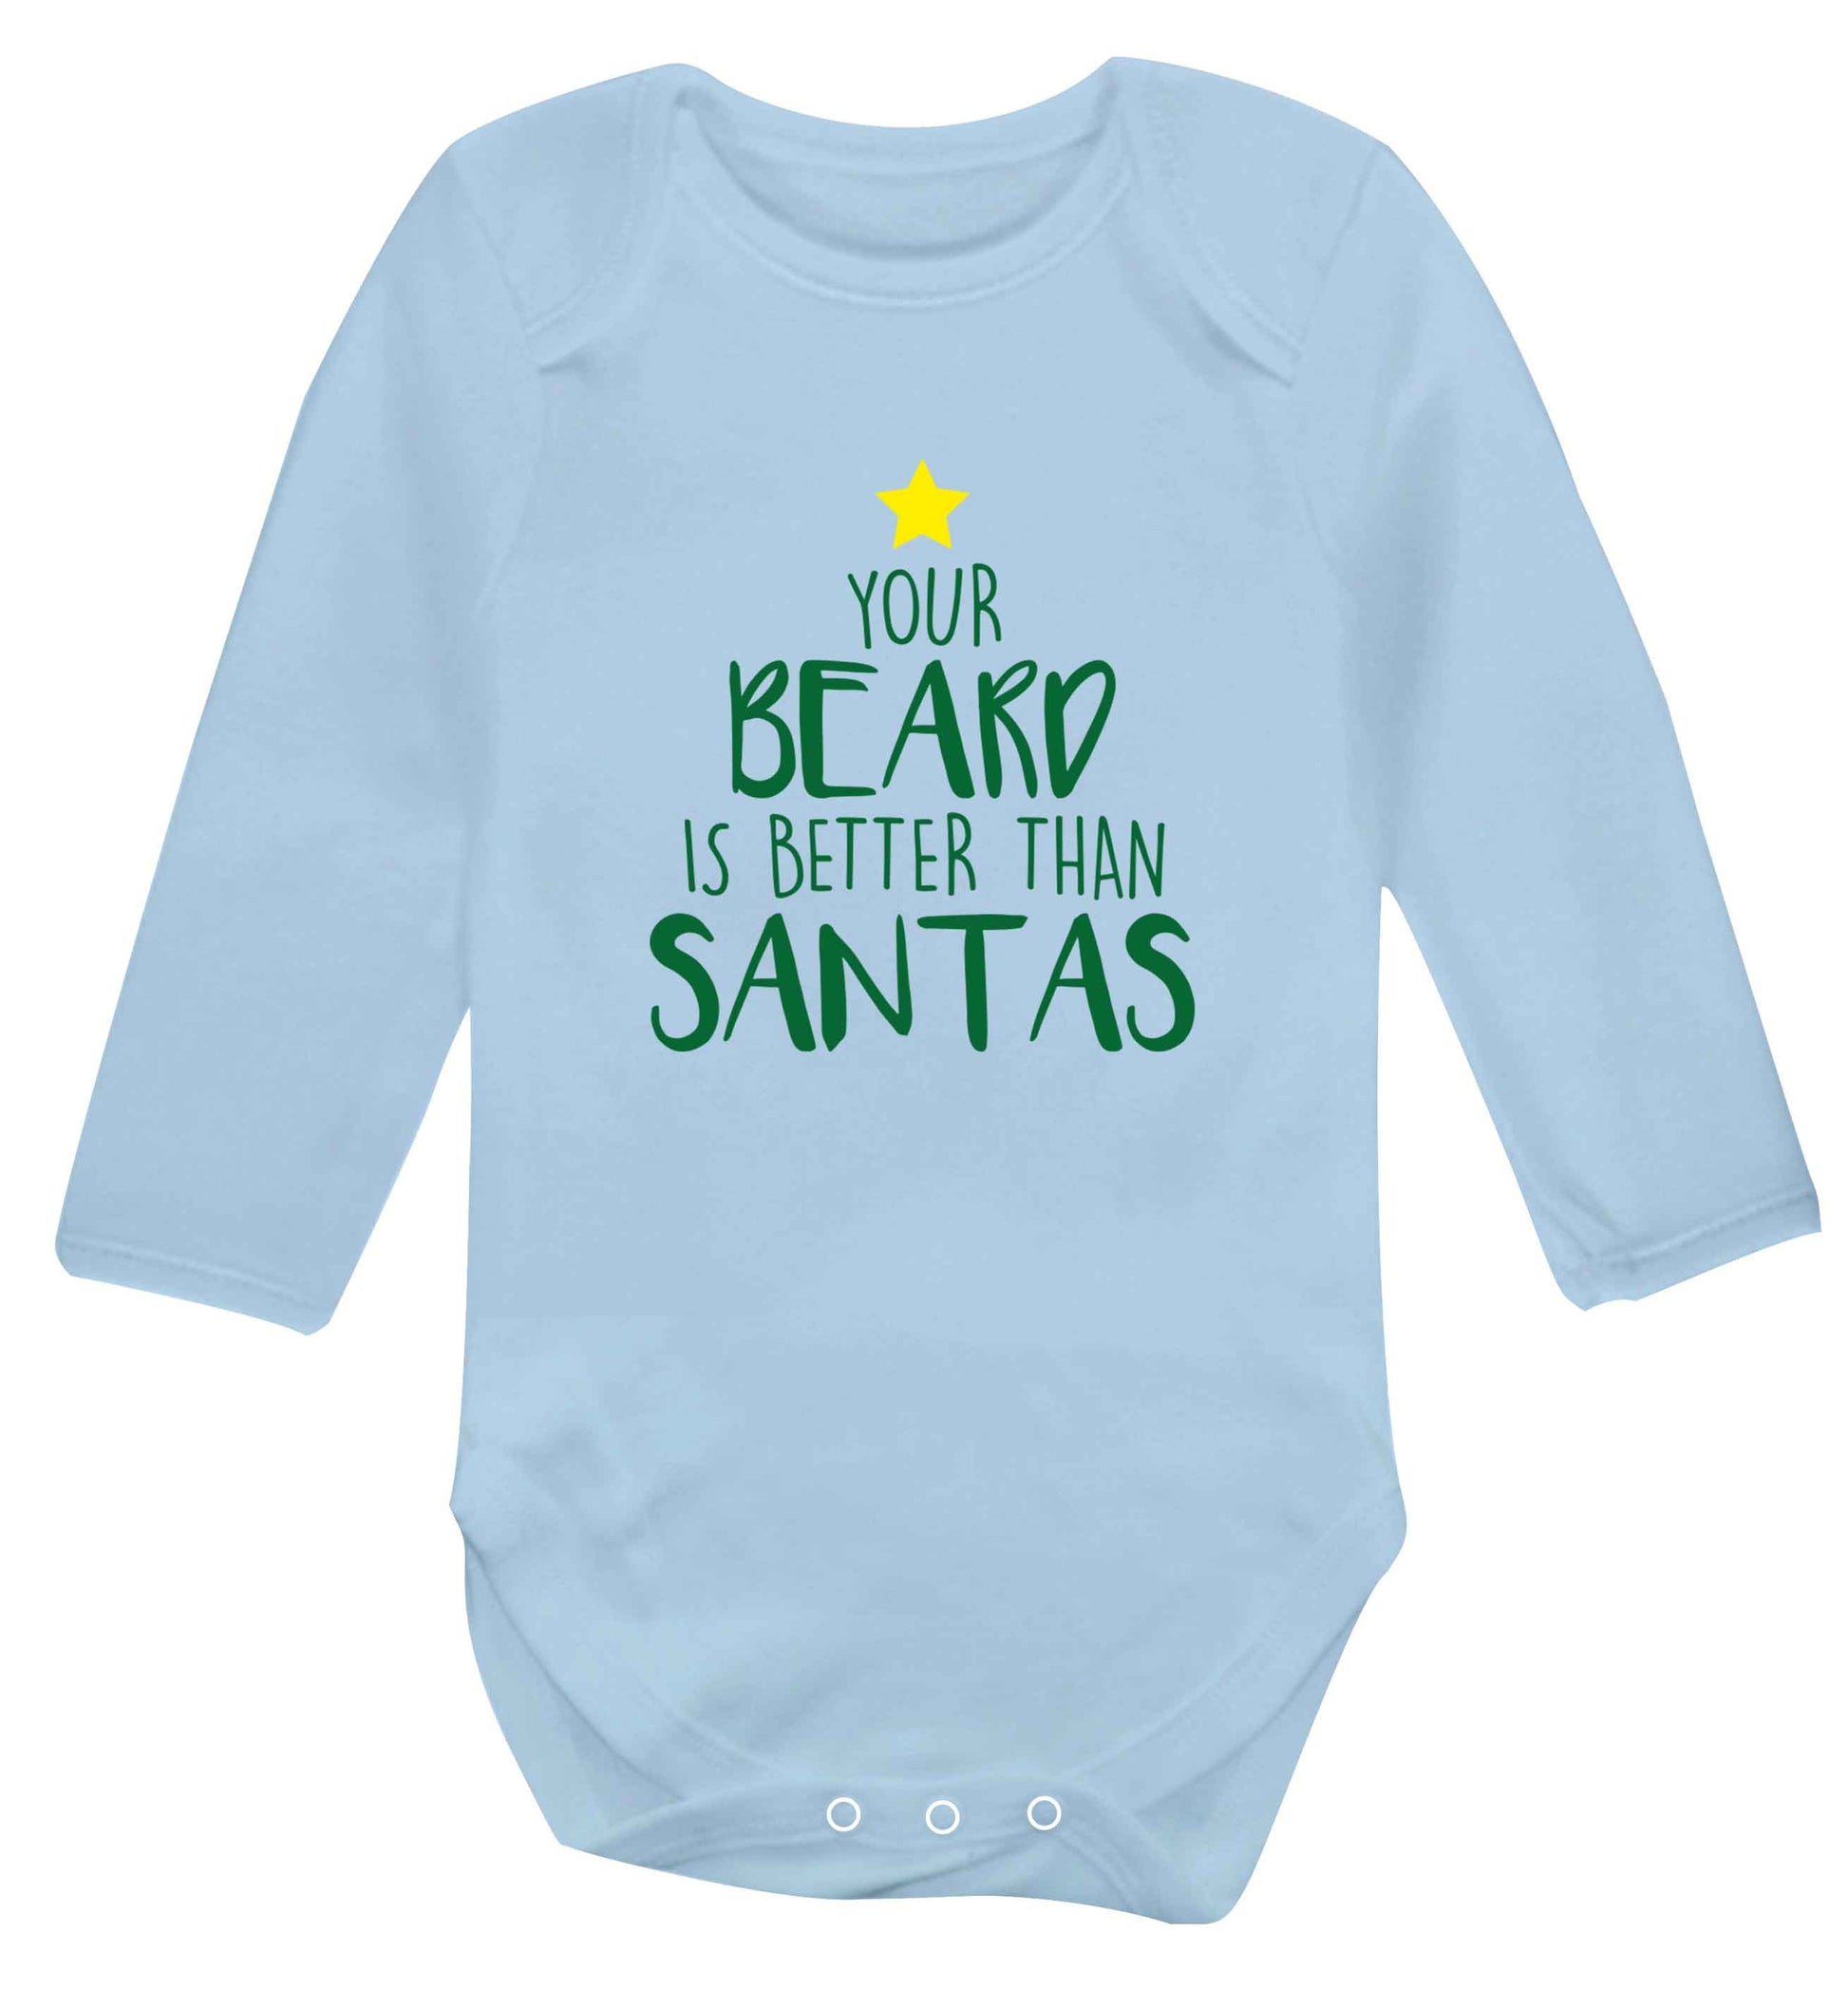 Your Beard Better than Santas baby vest long sleeved pale blue 6-12 months